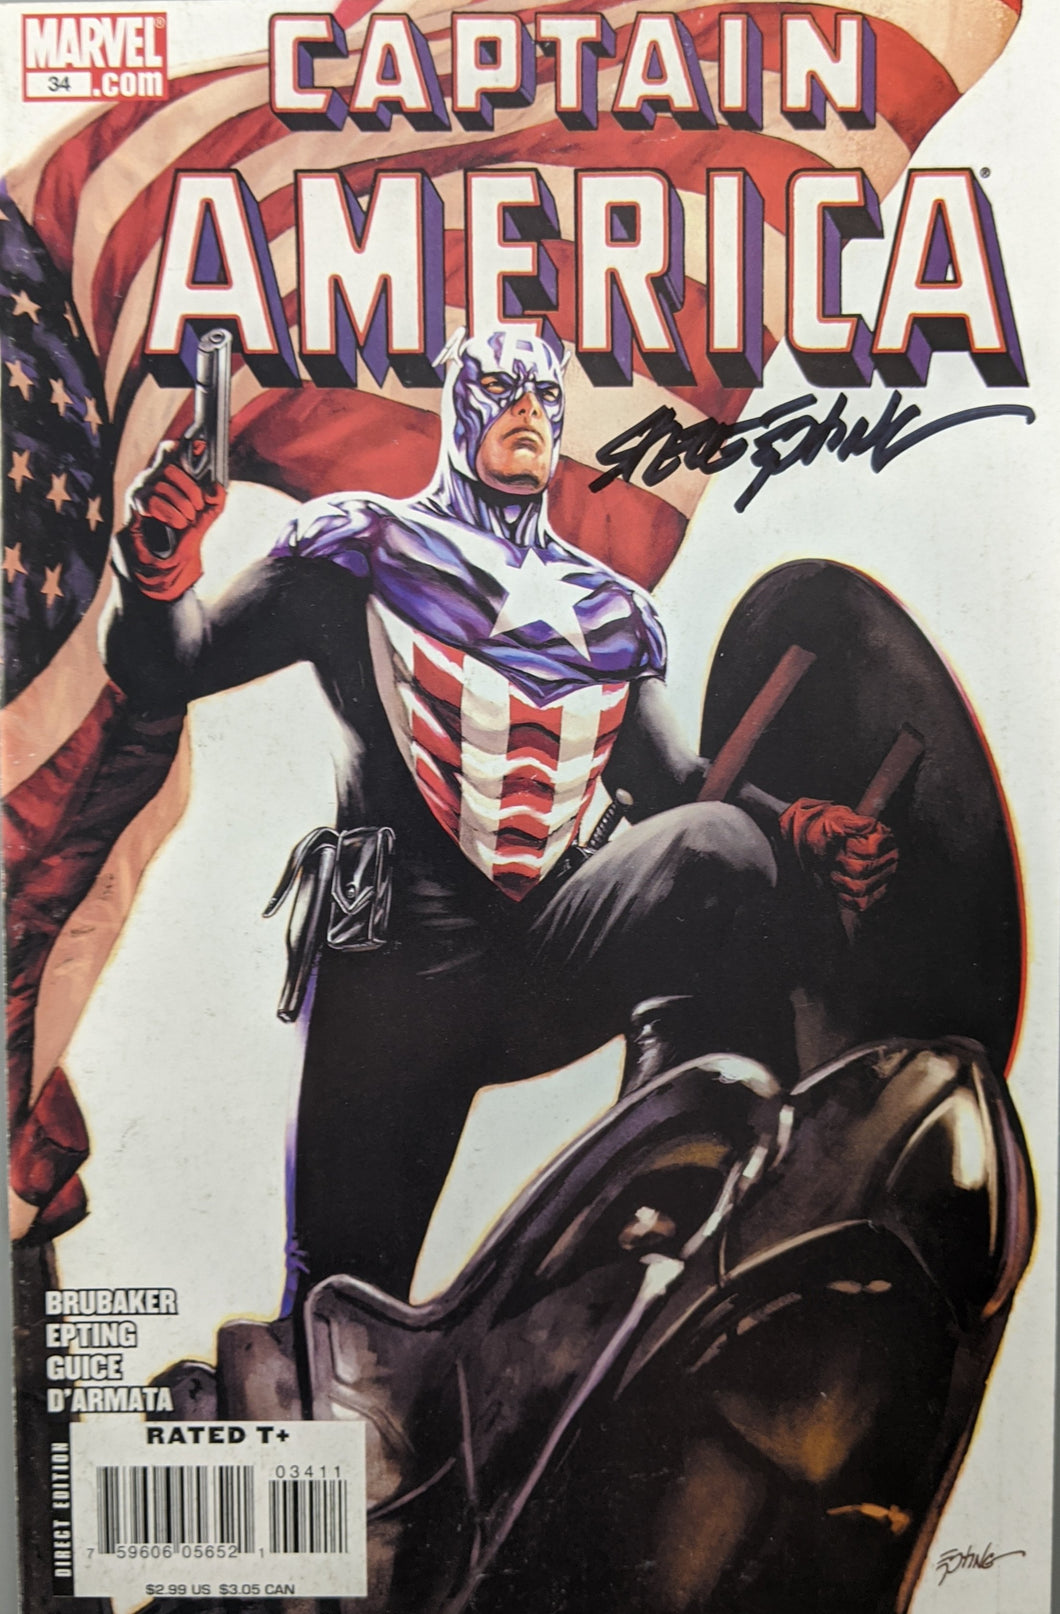 Captain America (2005) #34 (Cover B) SIGNED x2